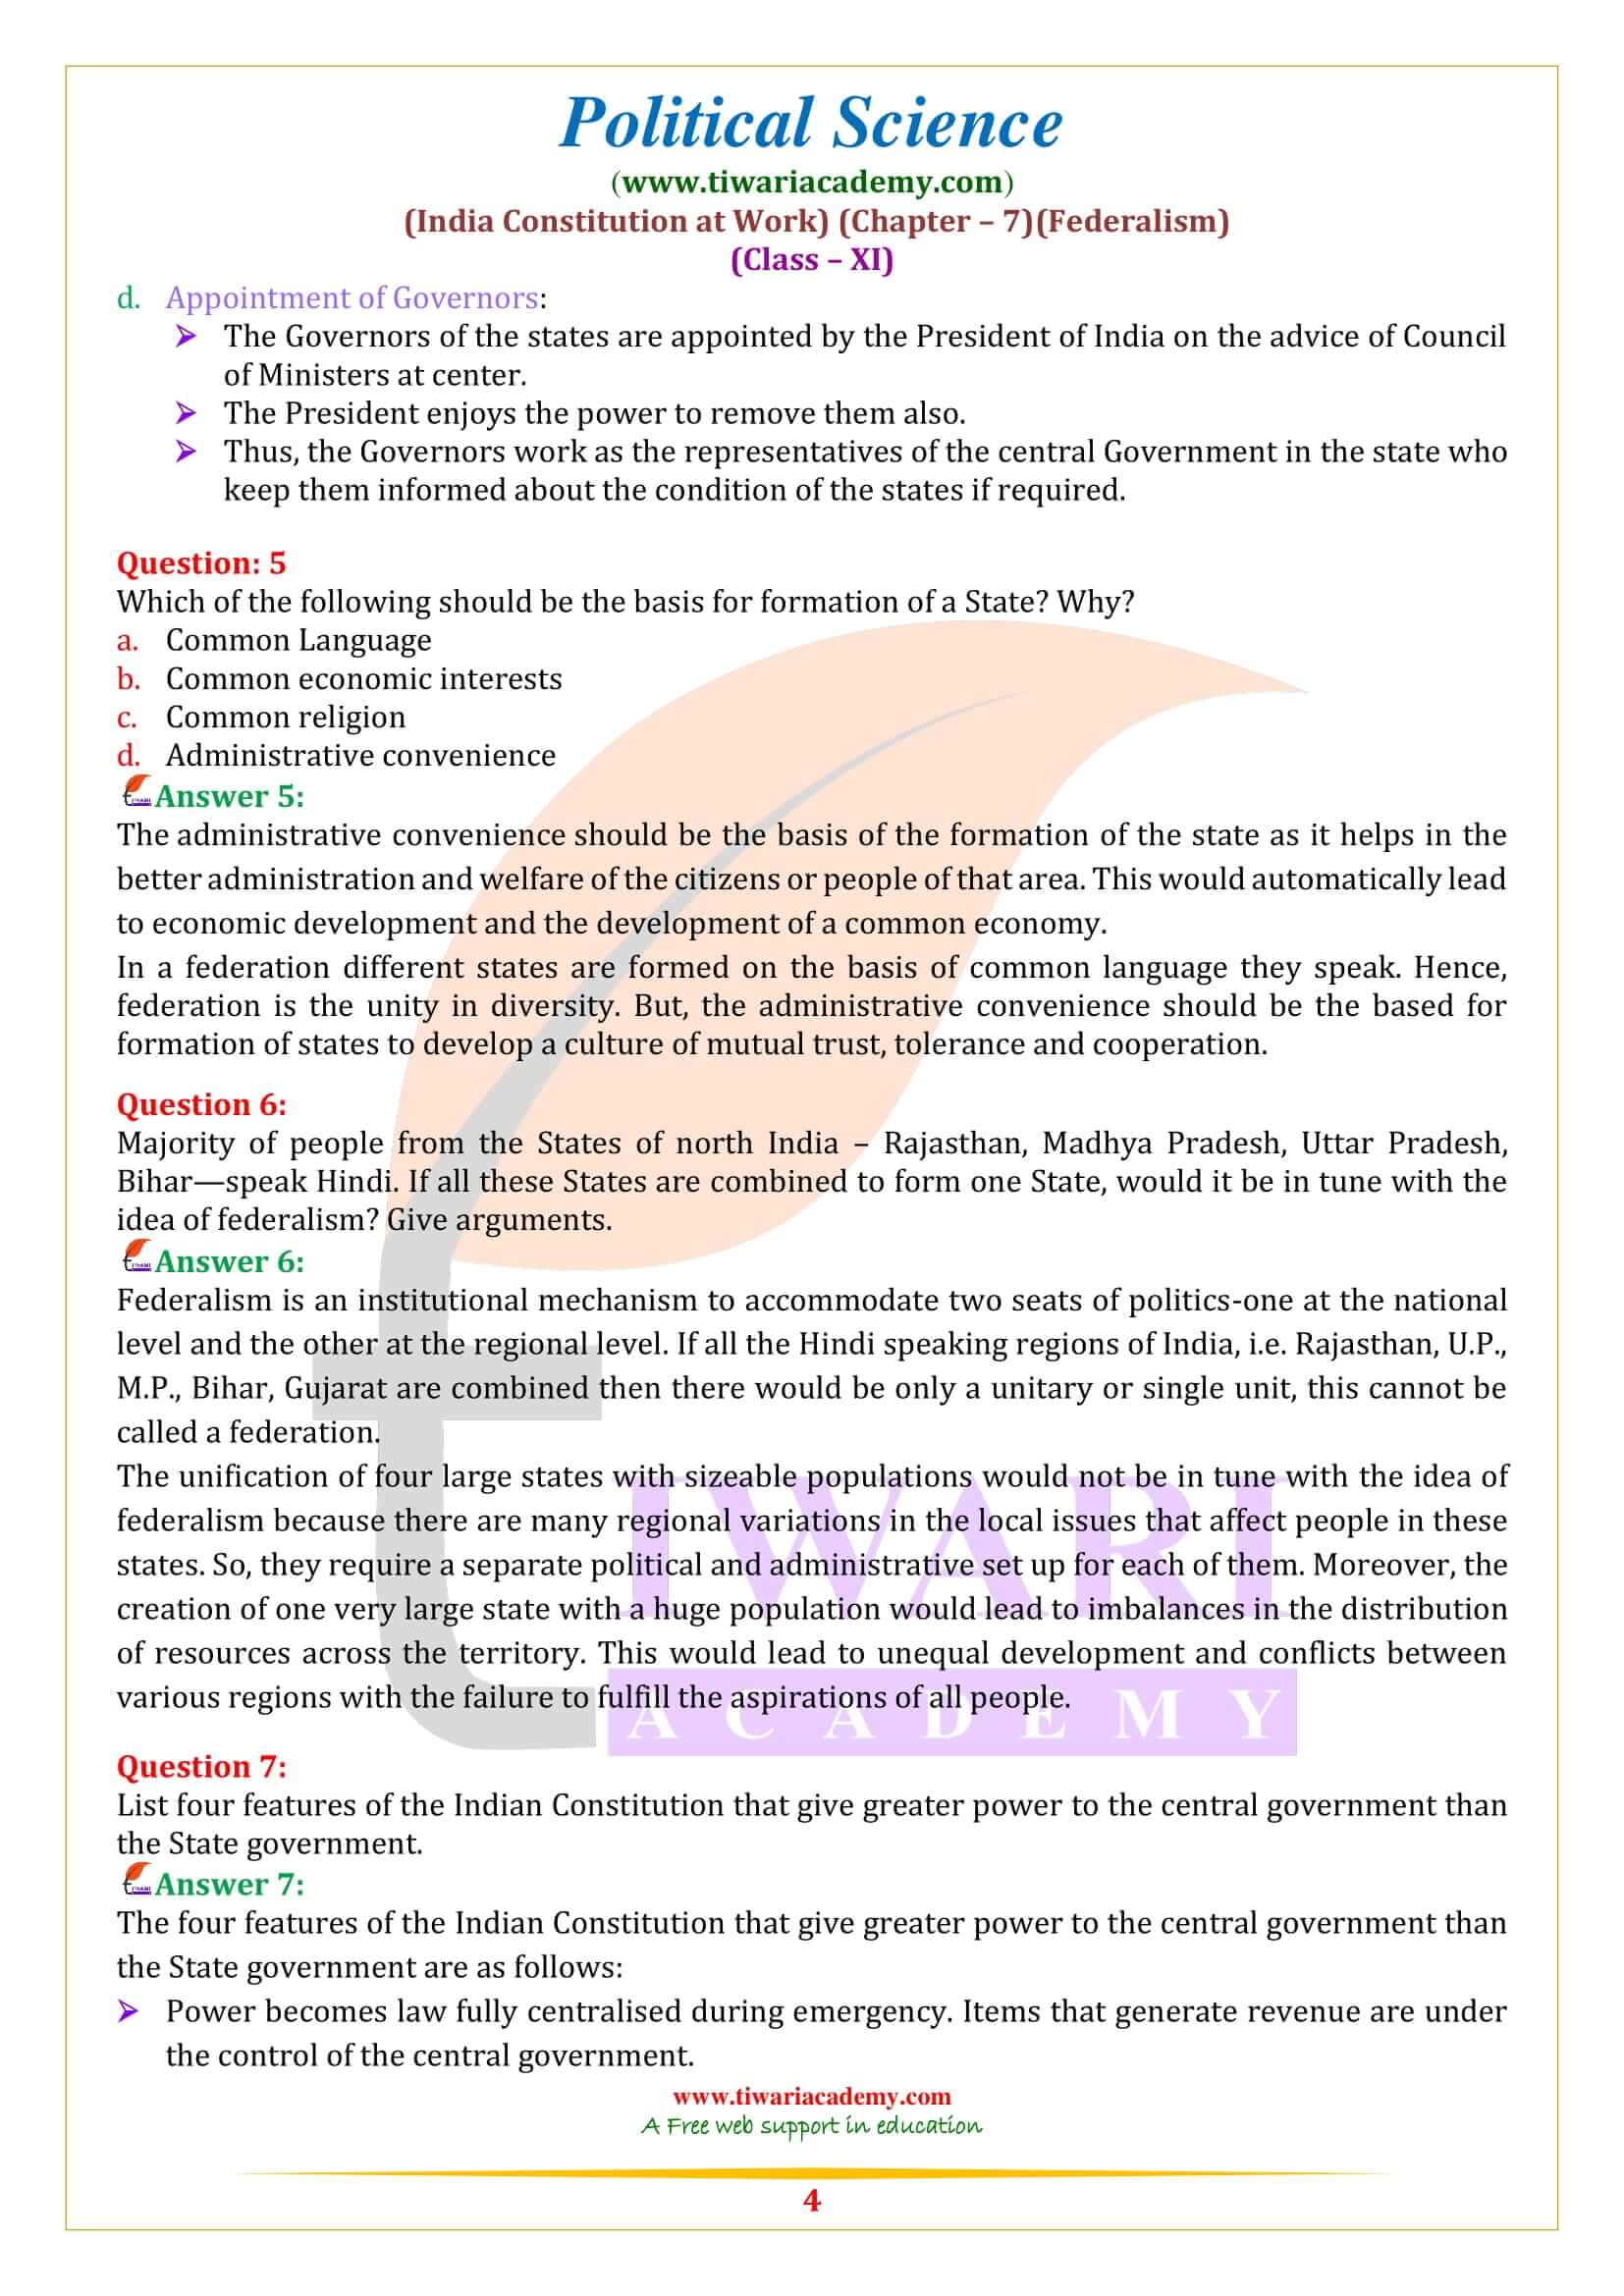 NCERT Solutions for Class 11 Political Science Chapter 7 free download